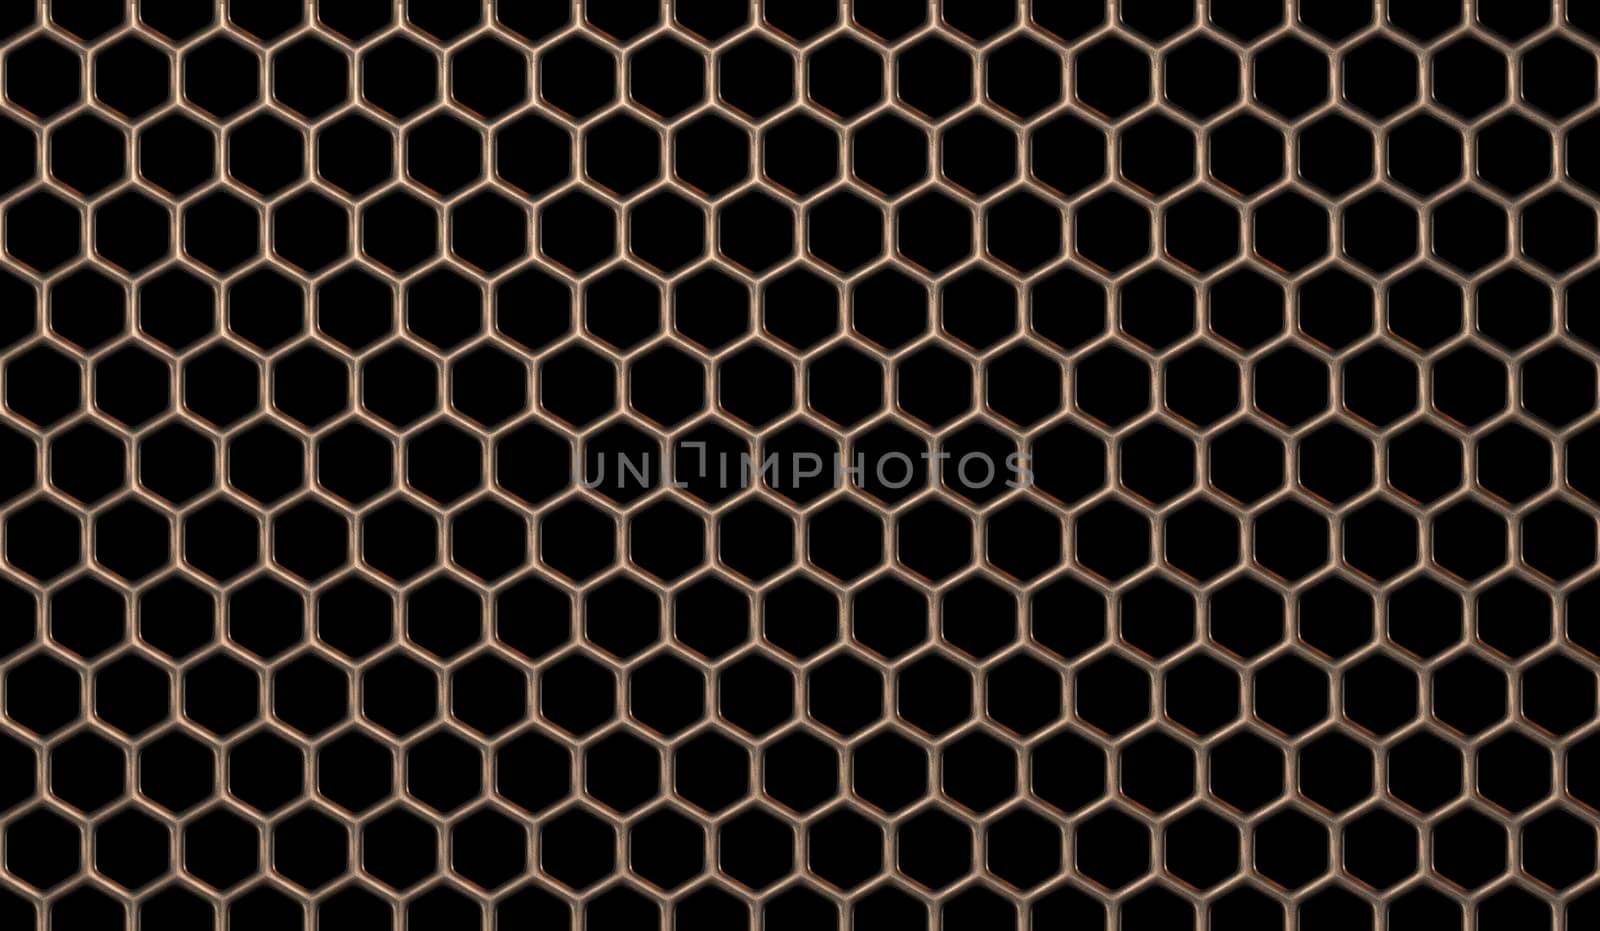 Beautiful seamless pattern of bronze mesh on a black background by Milanchikov